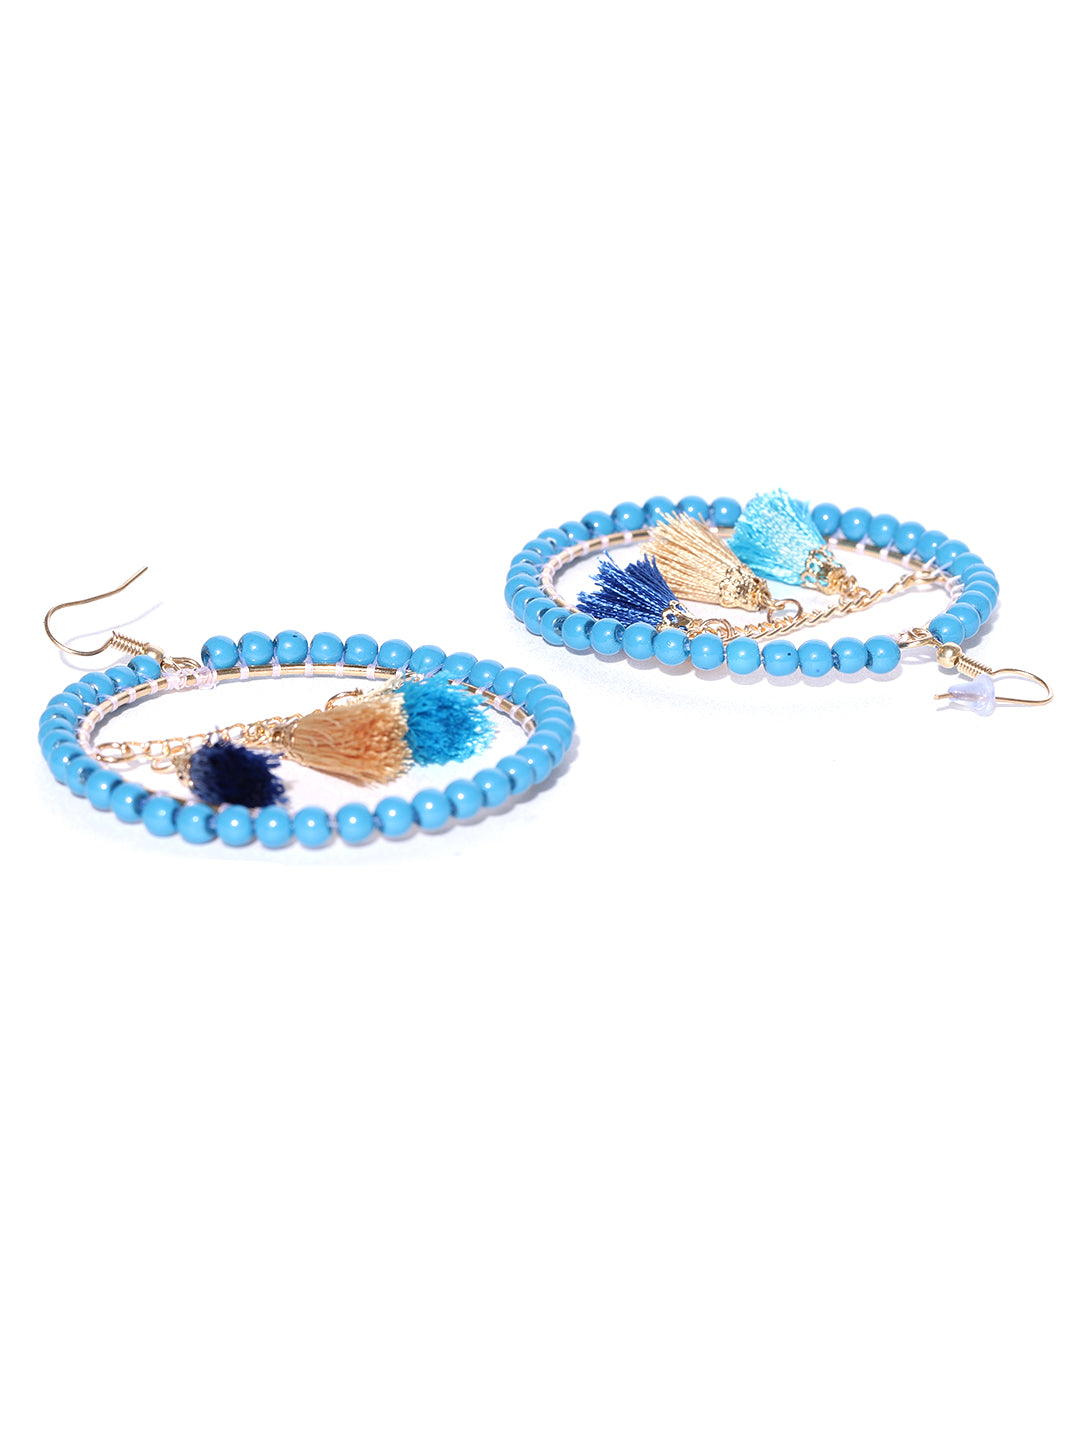 Blueberry gold and blue beads studded drop earring has tassel